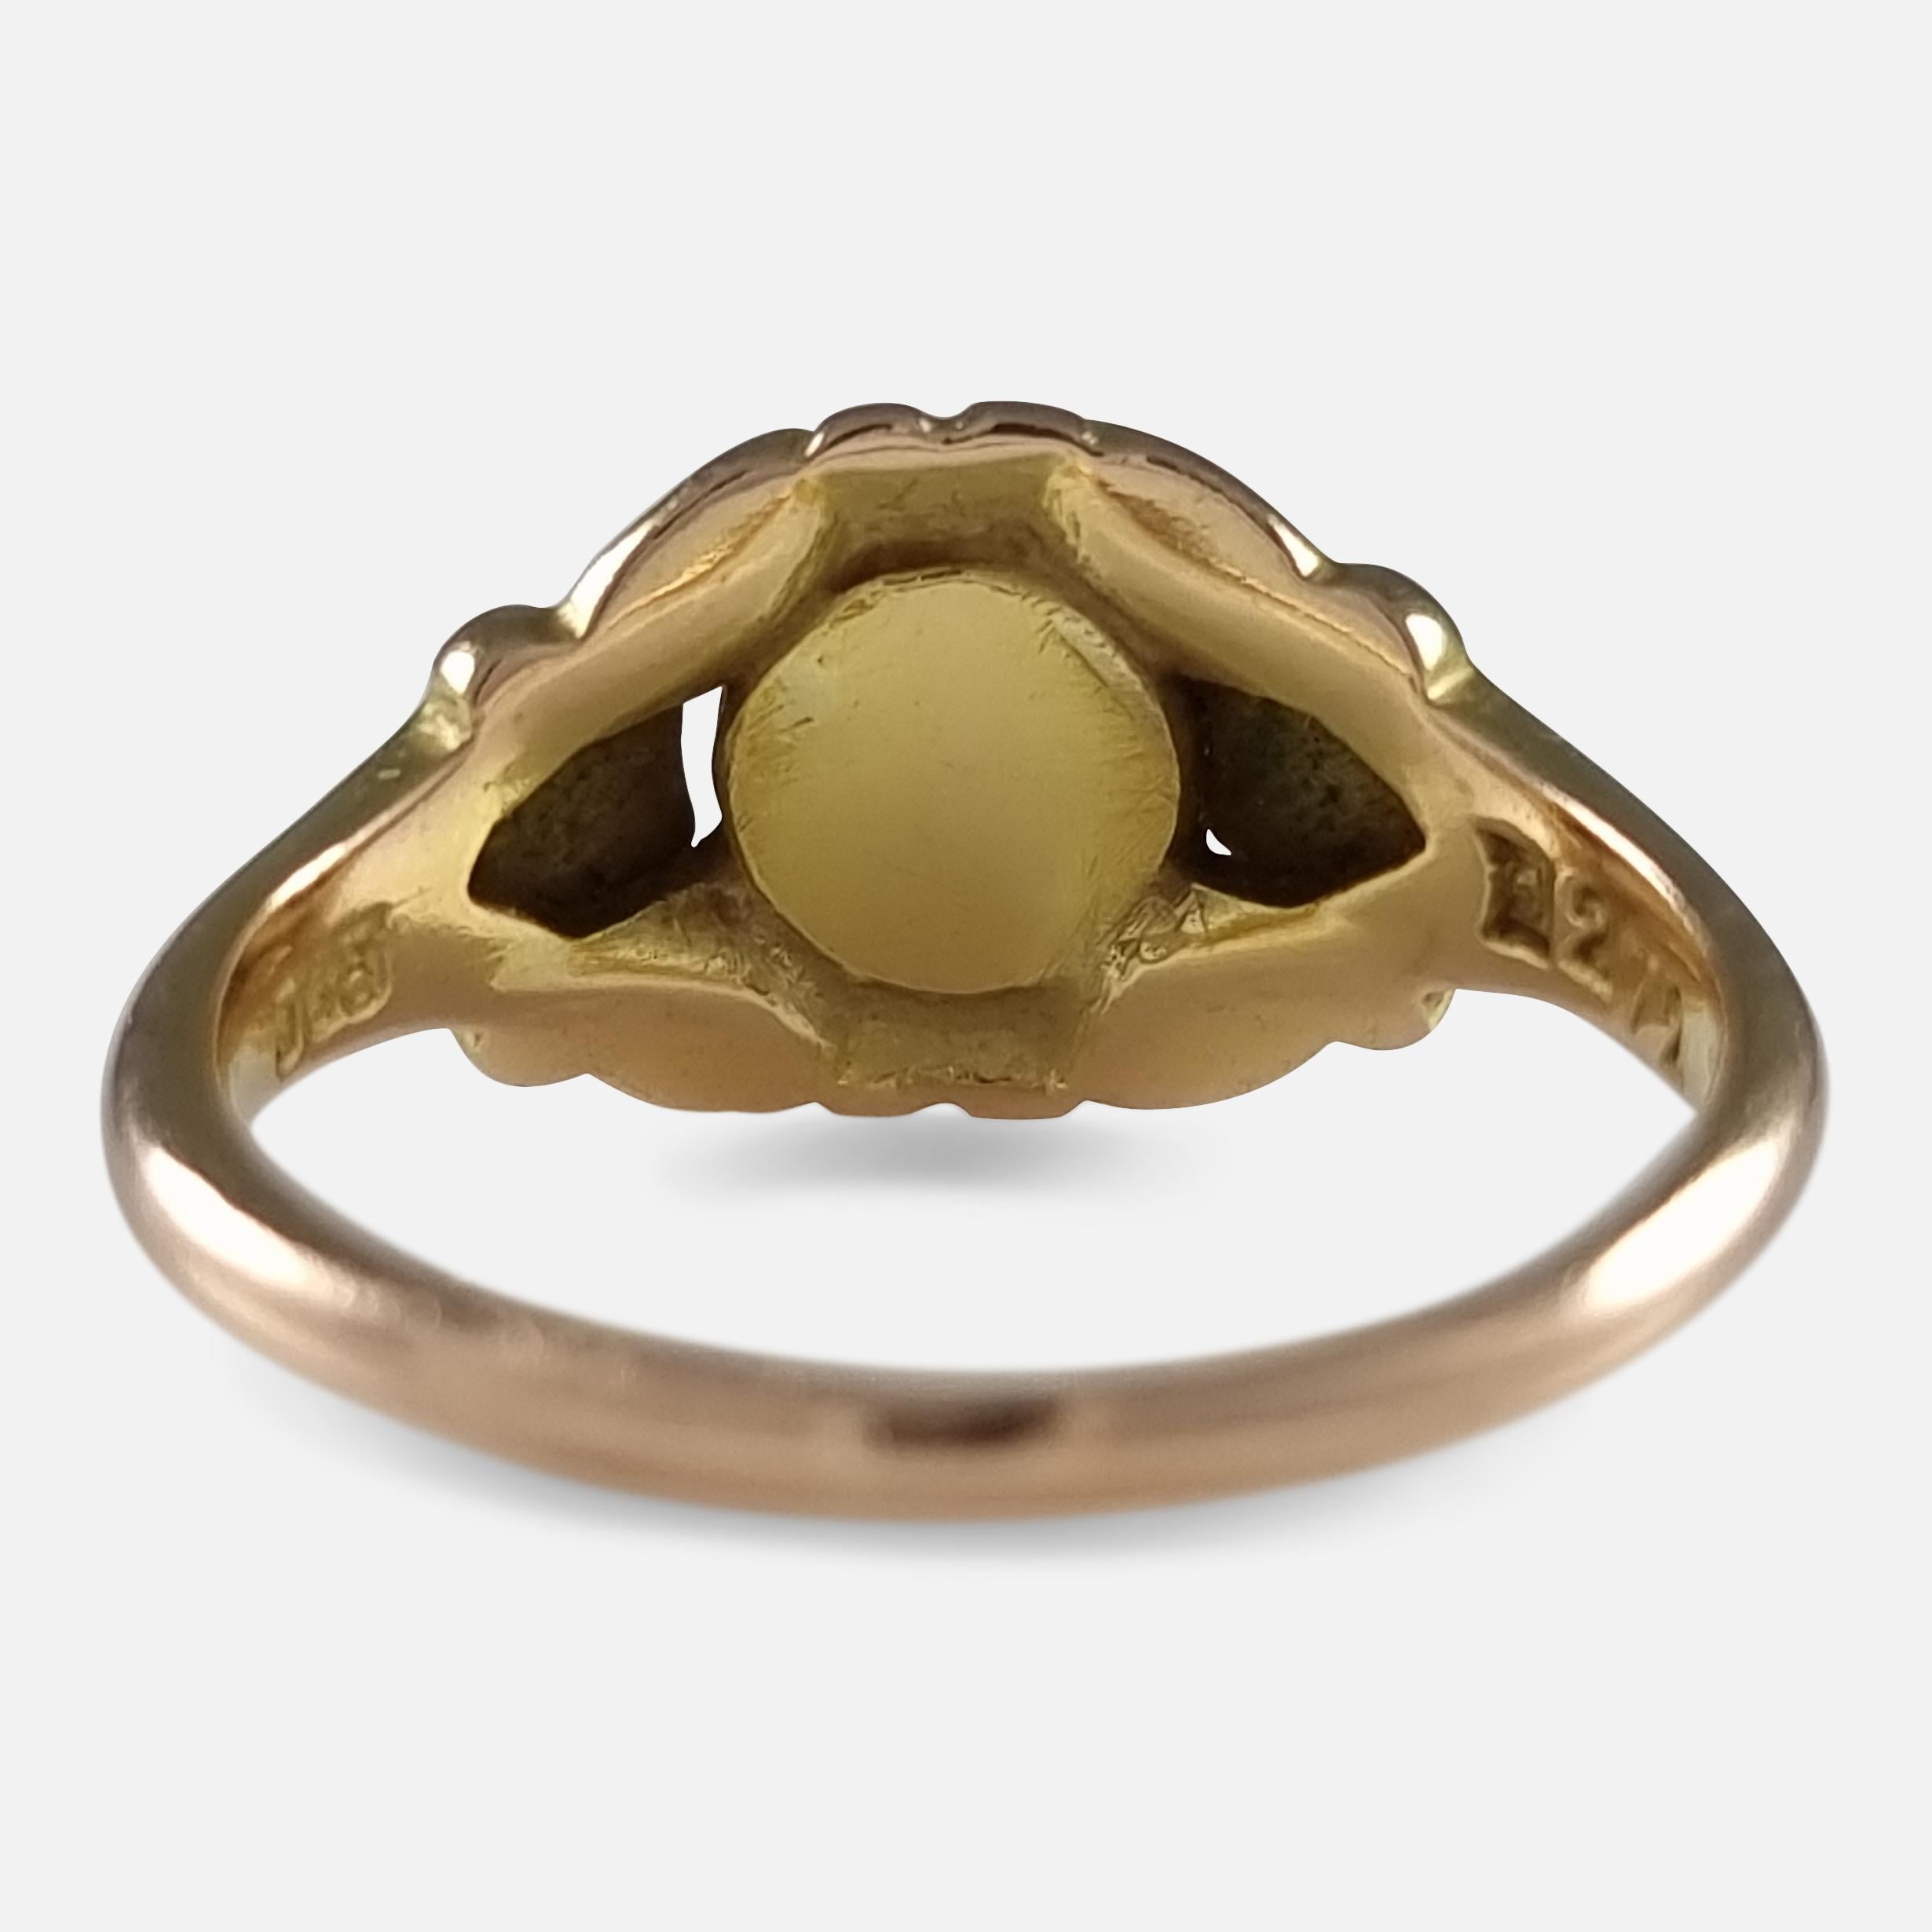 Georg Jensen 14ct Yellow Gold Pearl Ring, No. 272 In Good Condition For Sale In Glasgow, GB